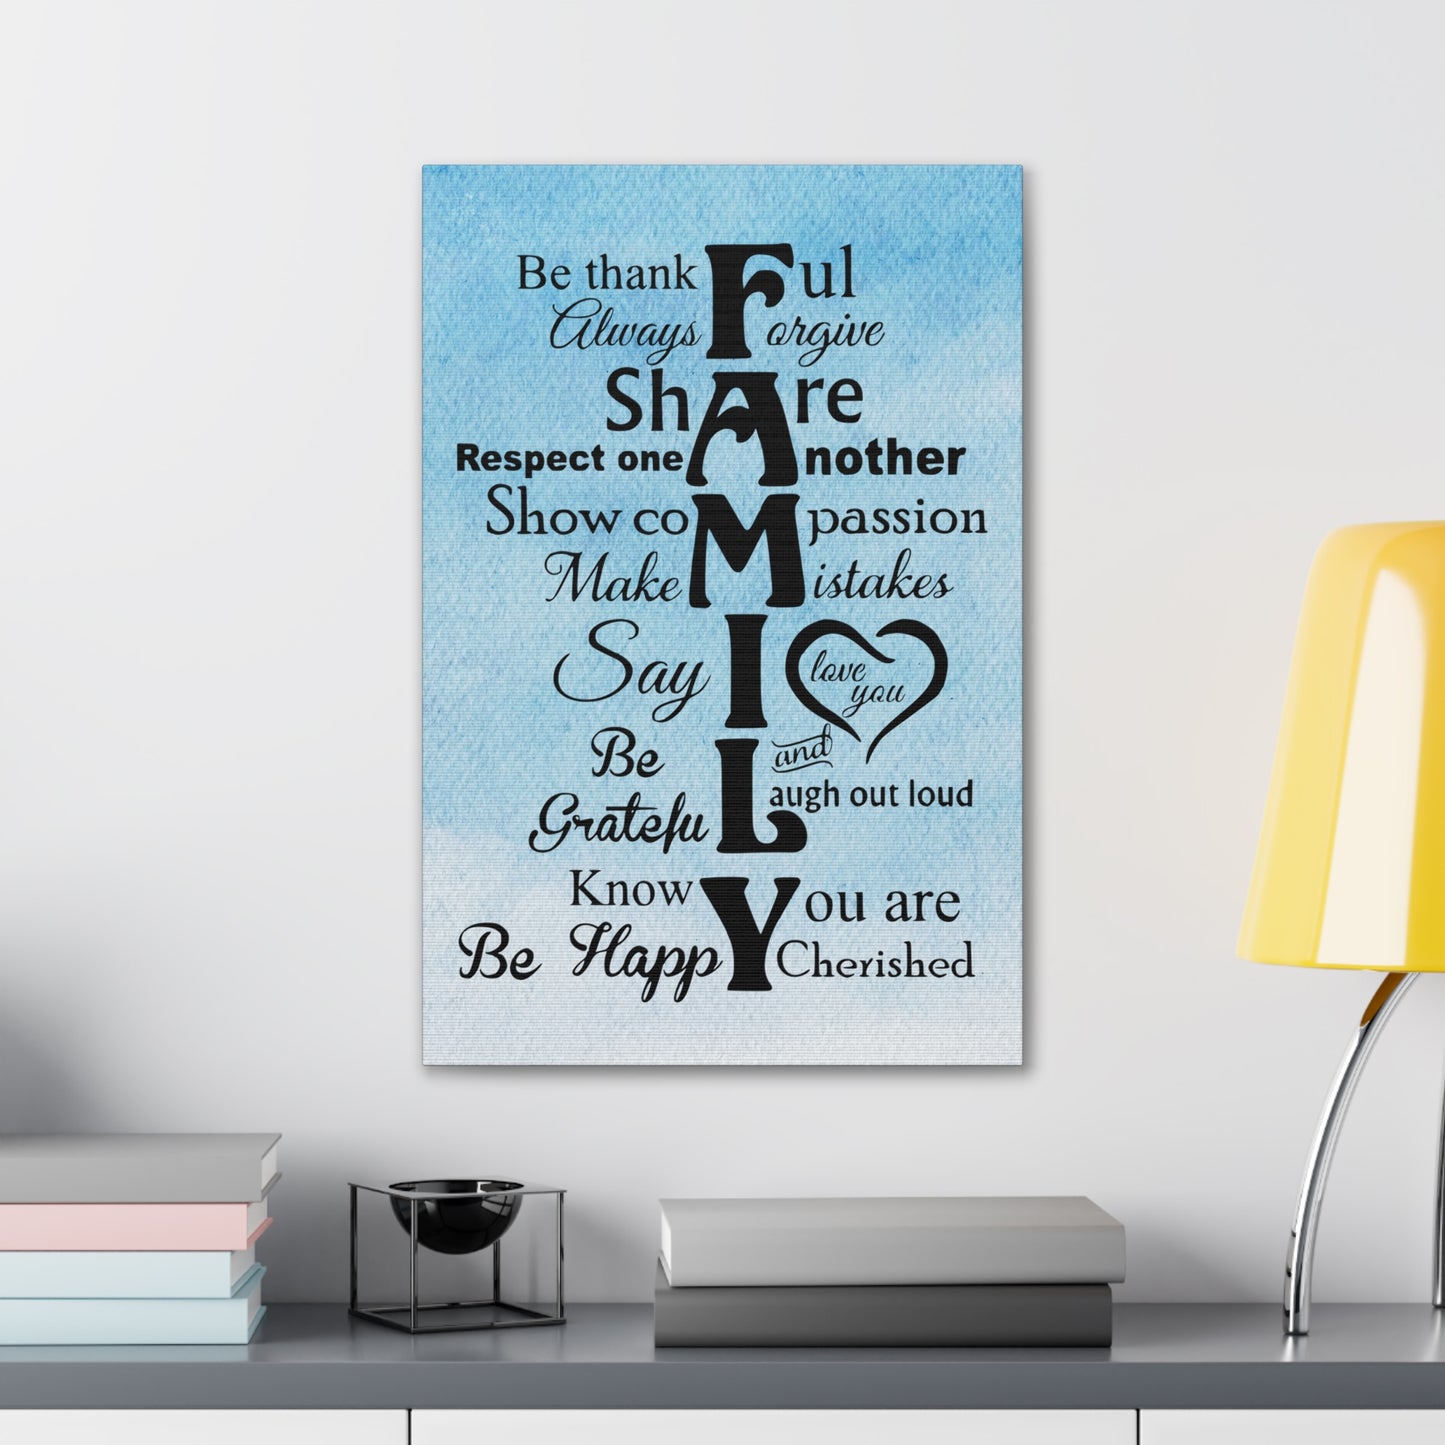 Calming and inspirational "FAMILY: Core Values" wall decor perfect for any indoor setting.